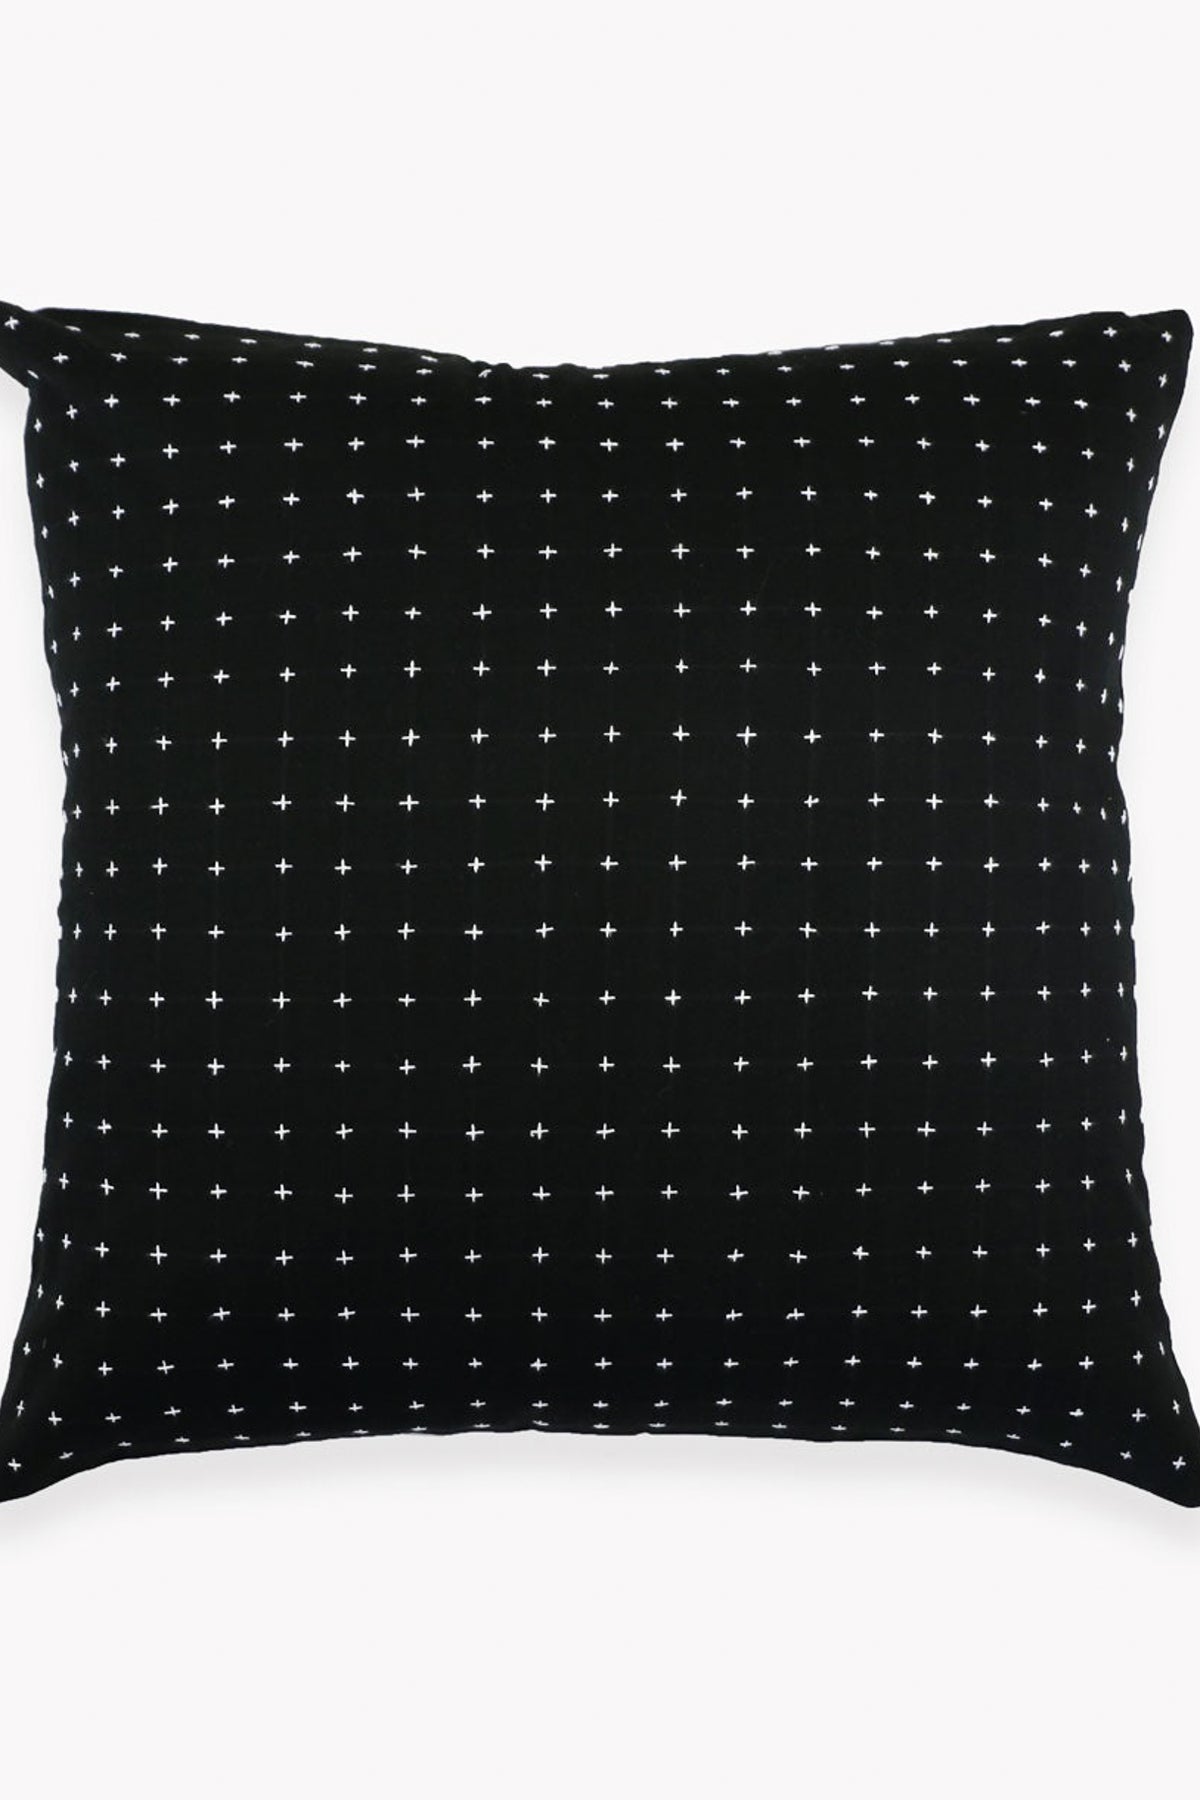 Anchal Project Cross-Stitch Throw Pillow Cover